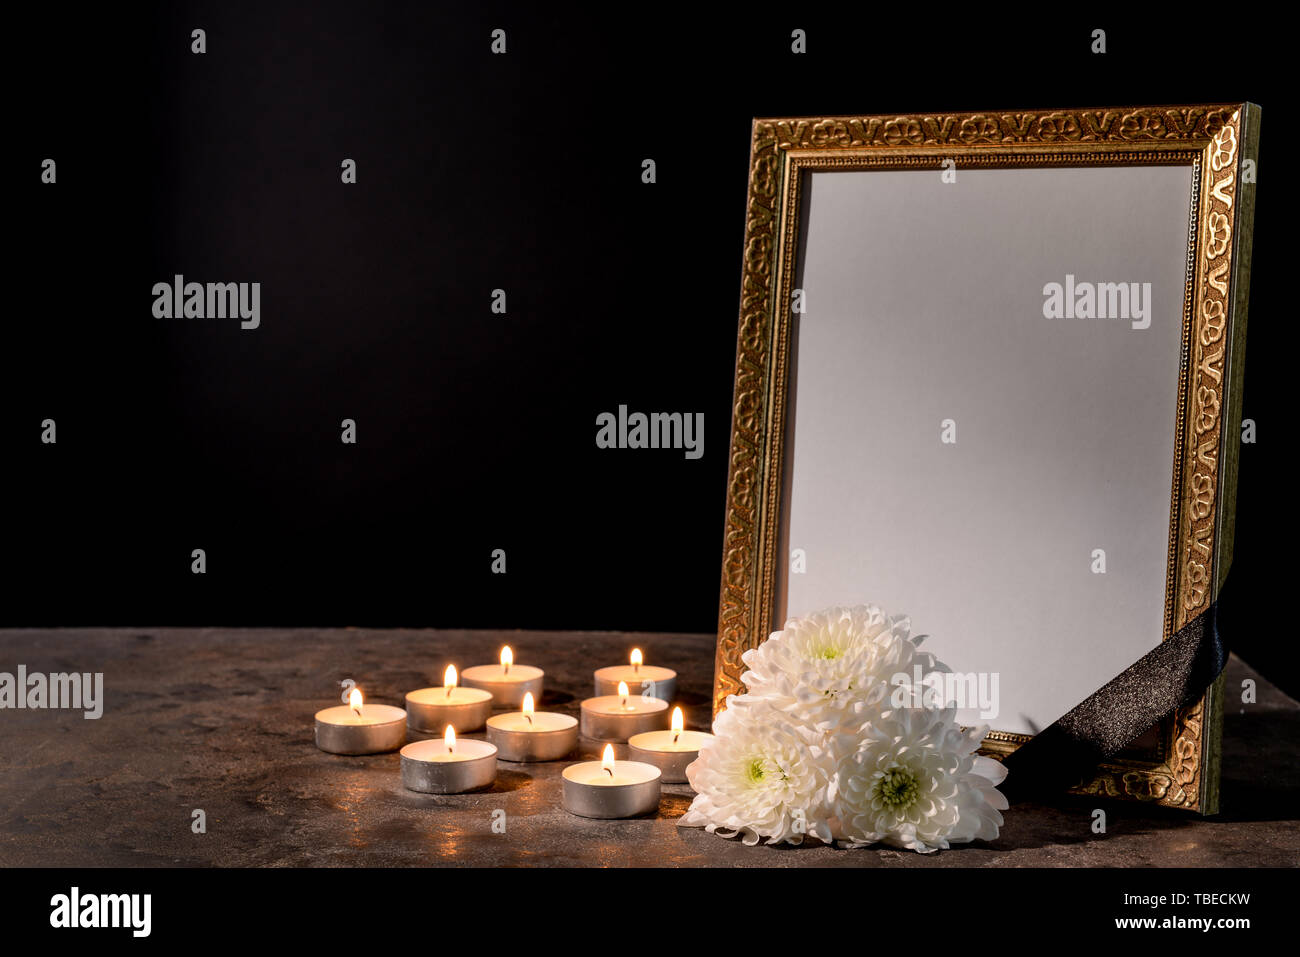 Blank funeral frame, candles and flowers on table against black background  Stock Photo - Alamy